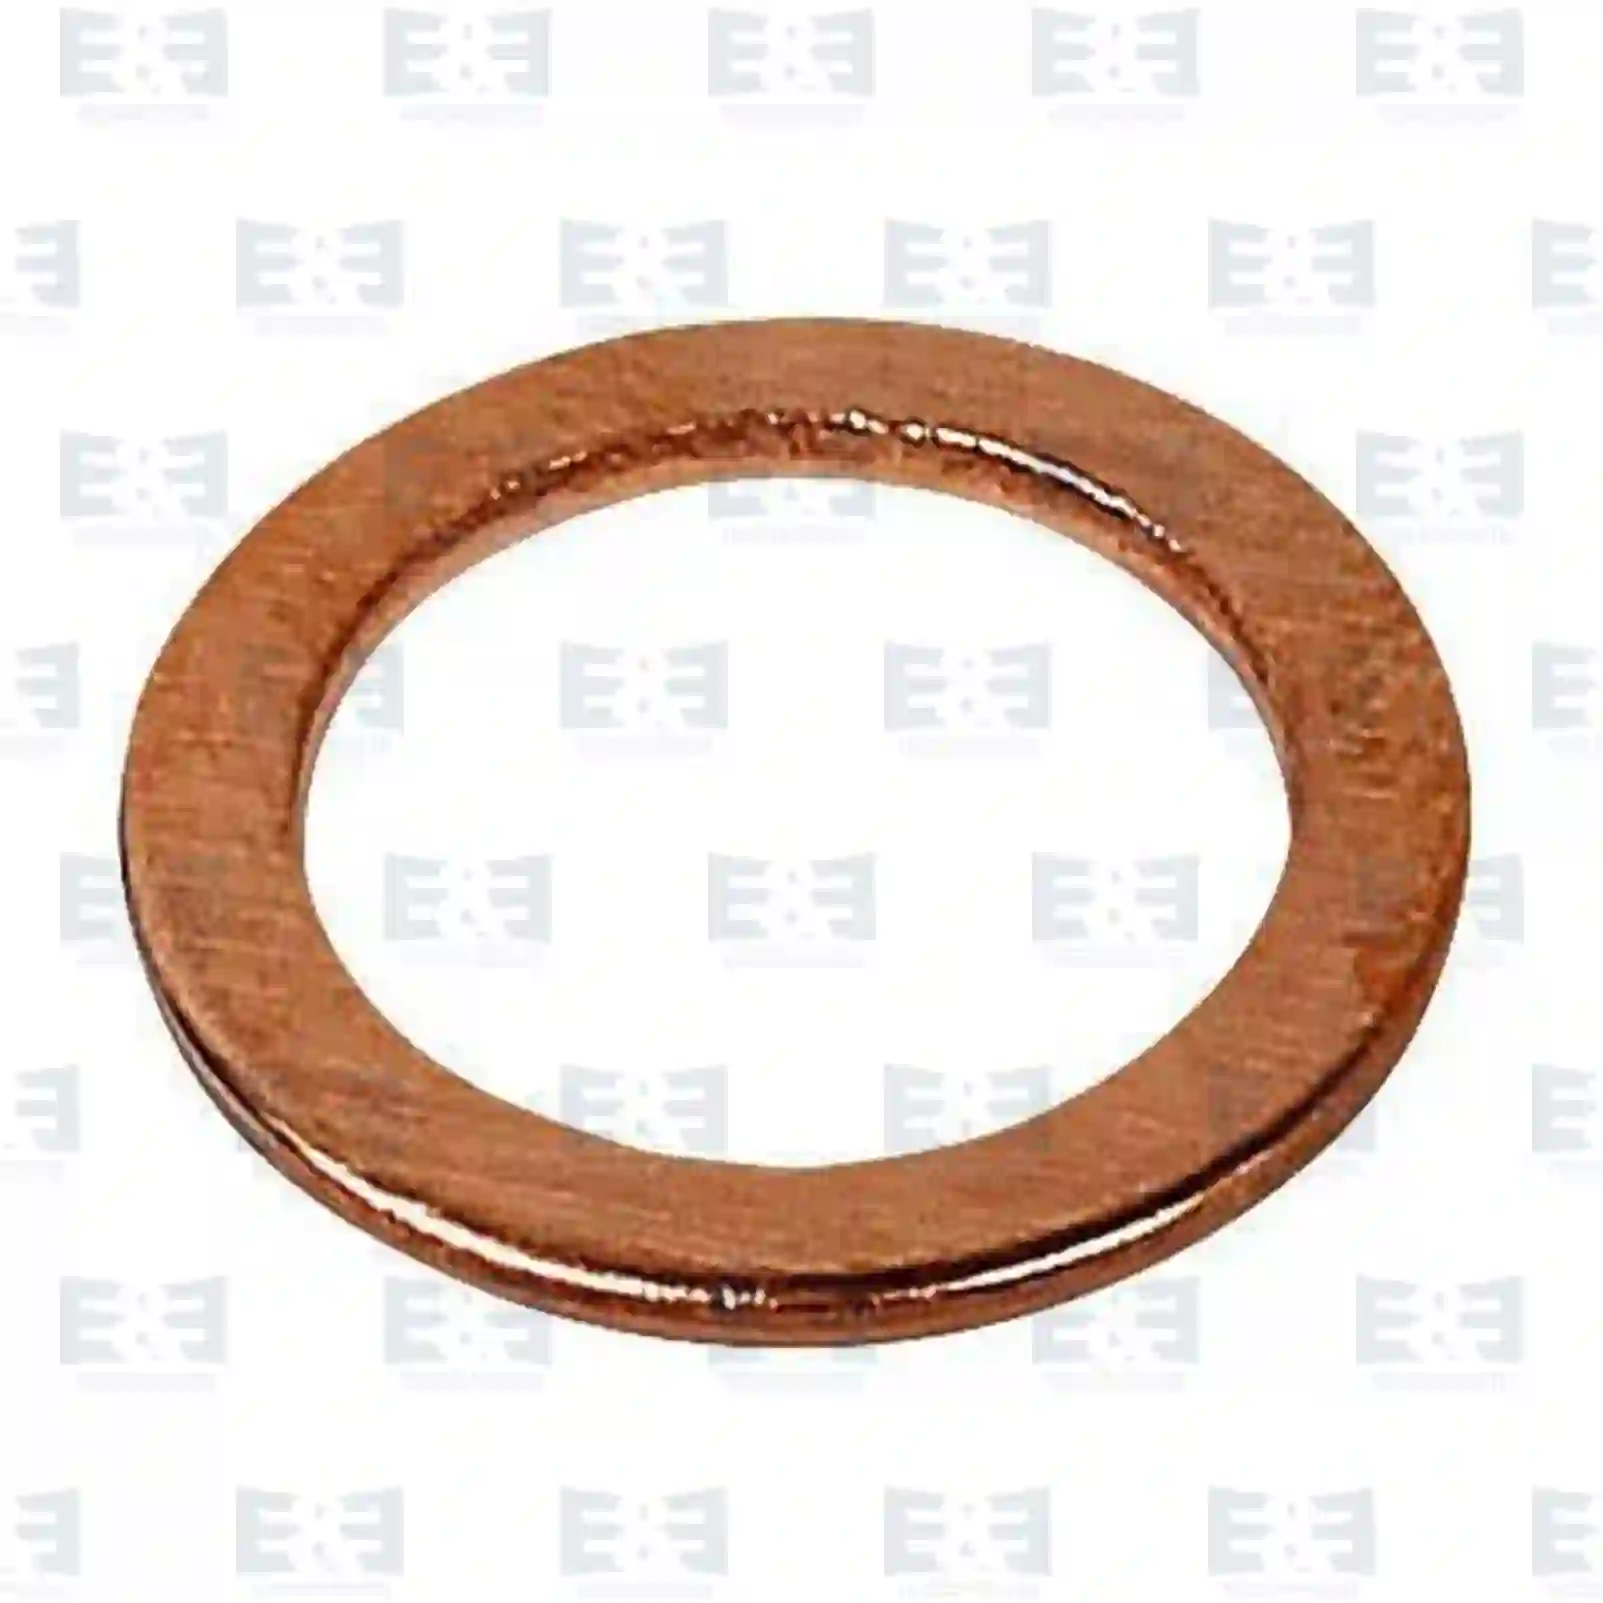 Standard Parts Copper washer, EE No 2E2286268 ,  oem no:10261160, 234032235, N0138141, N0138492, N138492, 07119963226, 5073945AA, 5073946AA, 117005, 134211, 11023582, 11023589, 94525114, 0244680, 244680, 01118688, 01118693, 01290877, 01301223, 5073946AA, 10280060, 1005306, 209725, 228195, 11023580, 11023582, 94525114, 0996731011, 0996731012, N007603014102, N007603014106, 933610R1, 16508160, 5073946AA, 01118693, 01301223, 7101008, 06561900706, 995641400, 000000001069, 007603014106, 007603014108, 07119963201, MN960041, 01118688, 01118693, 604920101418, 604920101420, 11026-HG00B, 2091046, 4803630, 117005, 134211, 0003008058, 0870073700, 5000254857, 7400969011, 7703062043, 7522709, 8728051, 192633, 303098, 461924, N0138141, N0138492, N138492, N0138141, N0138492, N138492, 90003098015, 13947621, 18671, 186718, 969011, N0138492, N138492, ZG40226-0008 E&E Truck Spare Parts | Truck Spare Parts, Auotomotive Spare Parts